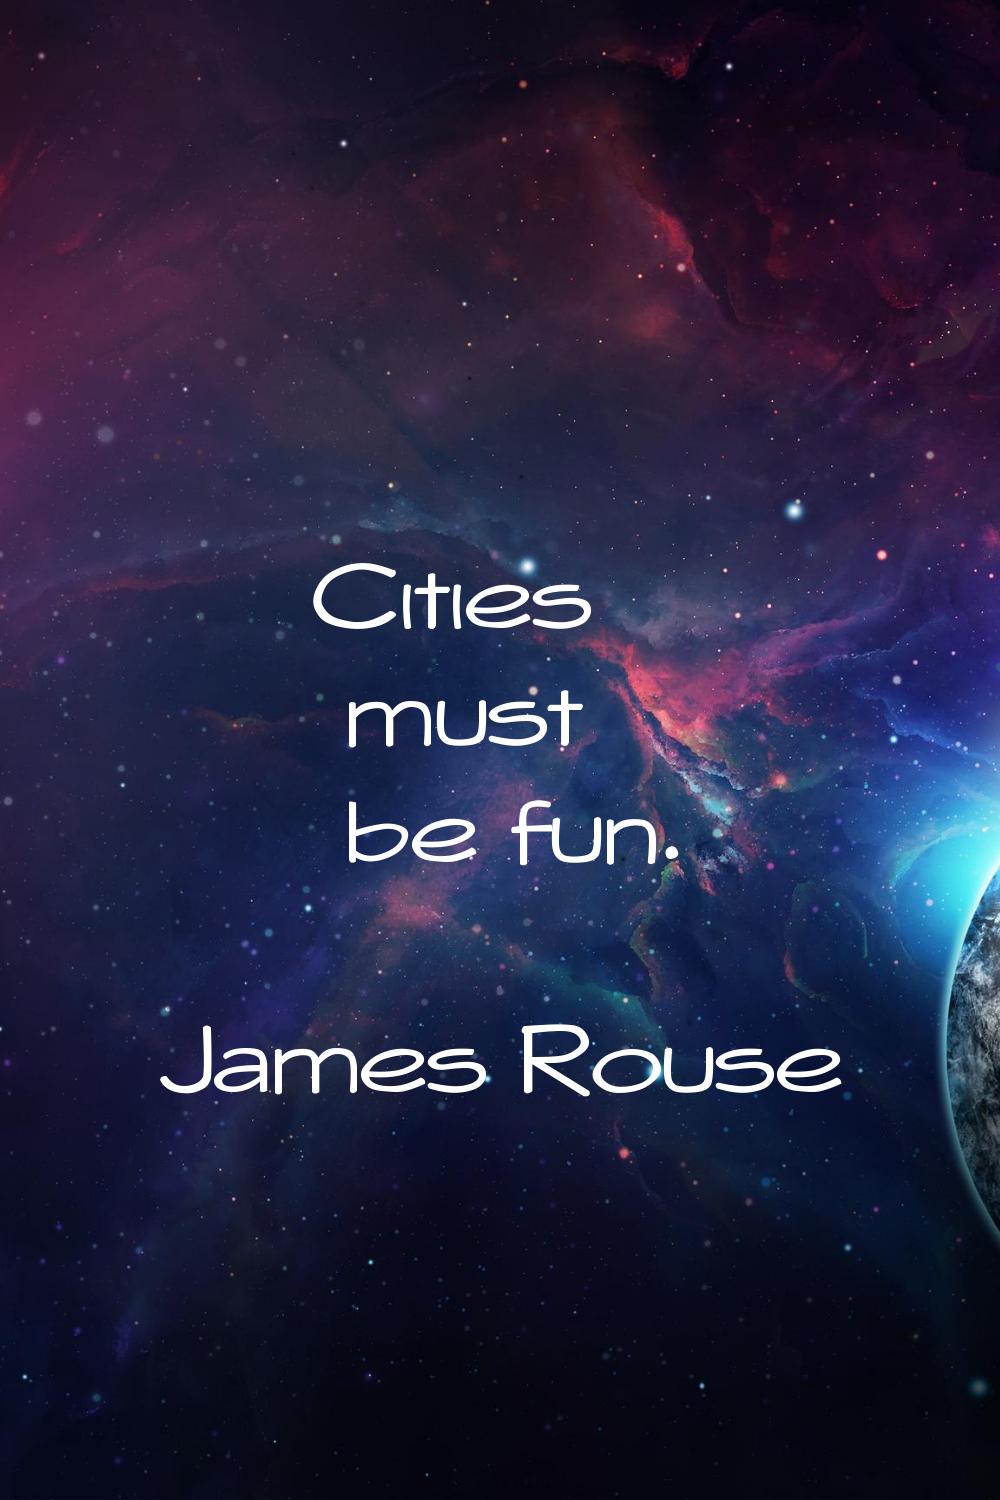 Cities must be fun.